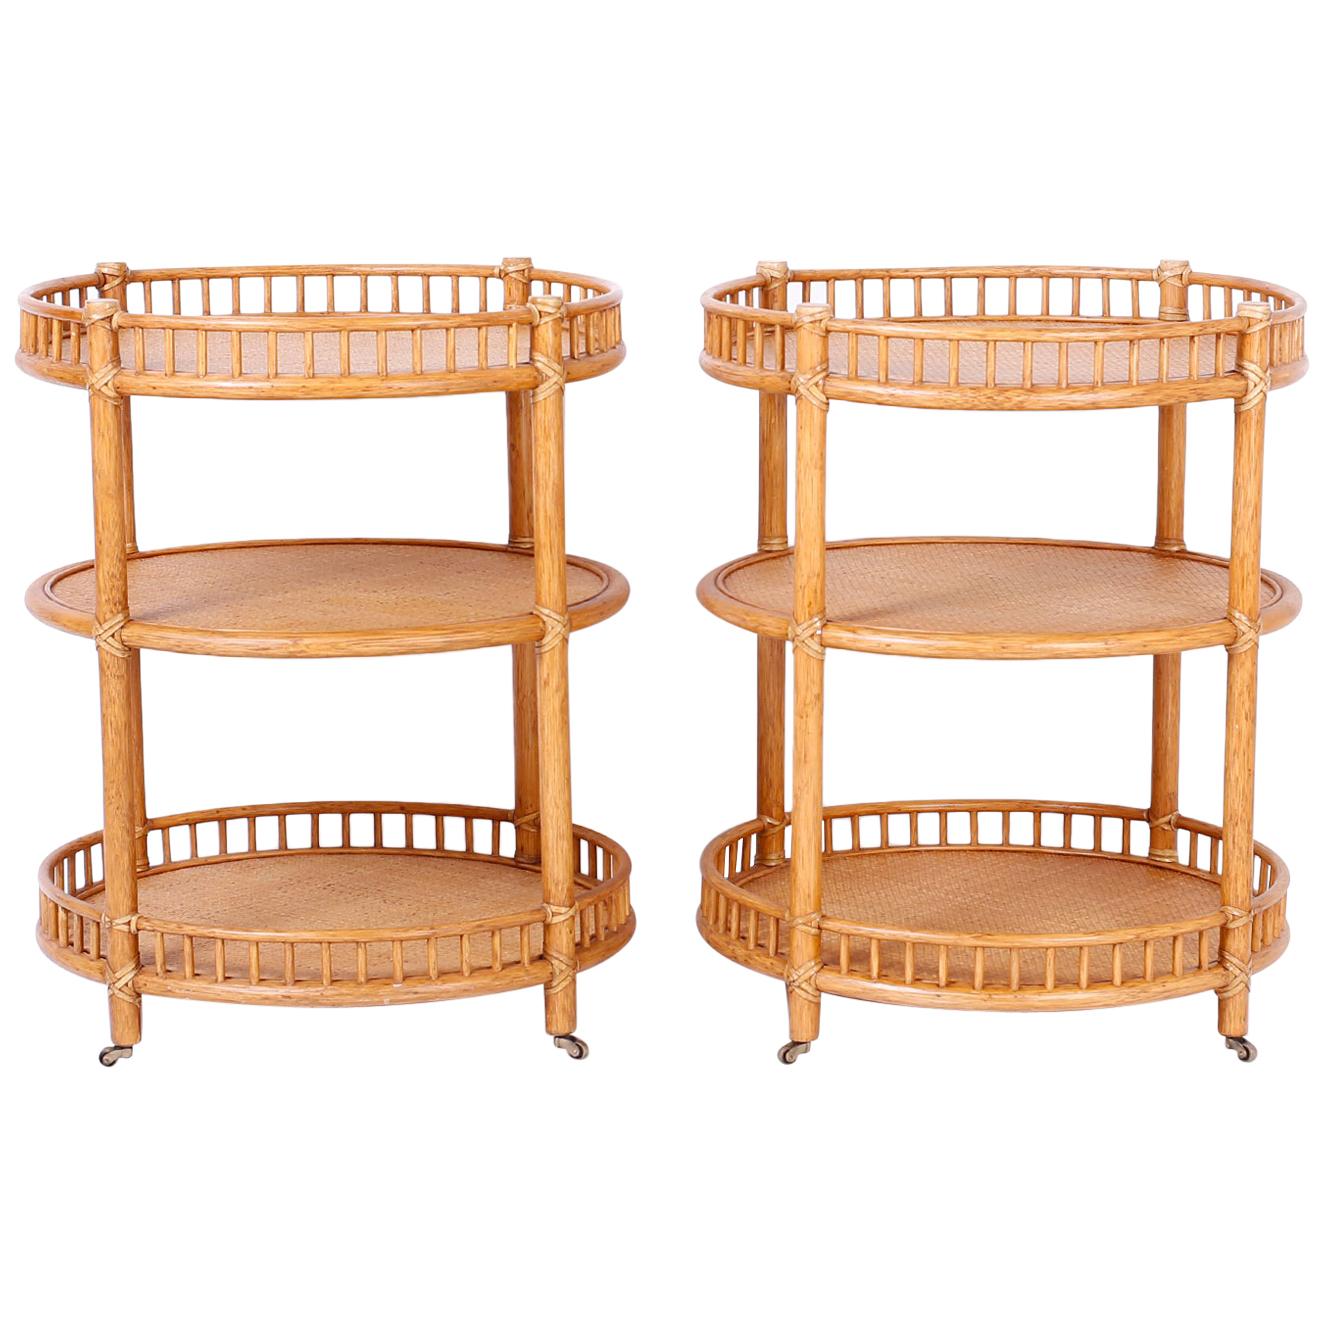 Pair of Midcentury British Colonial Style Stands or Carts